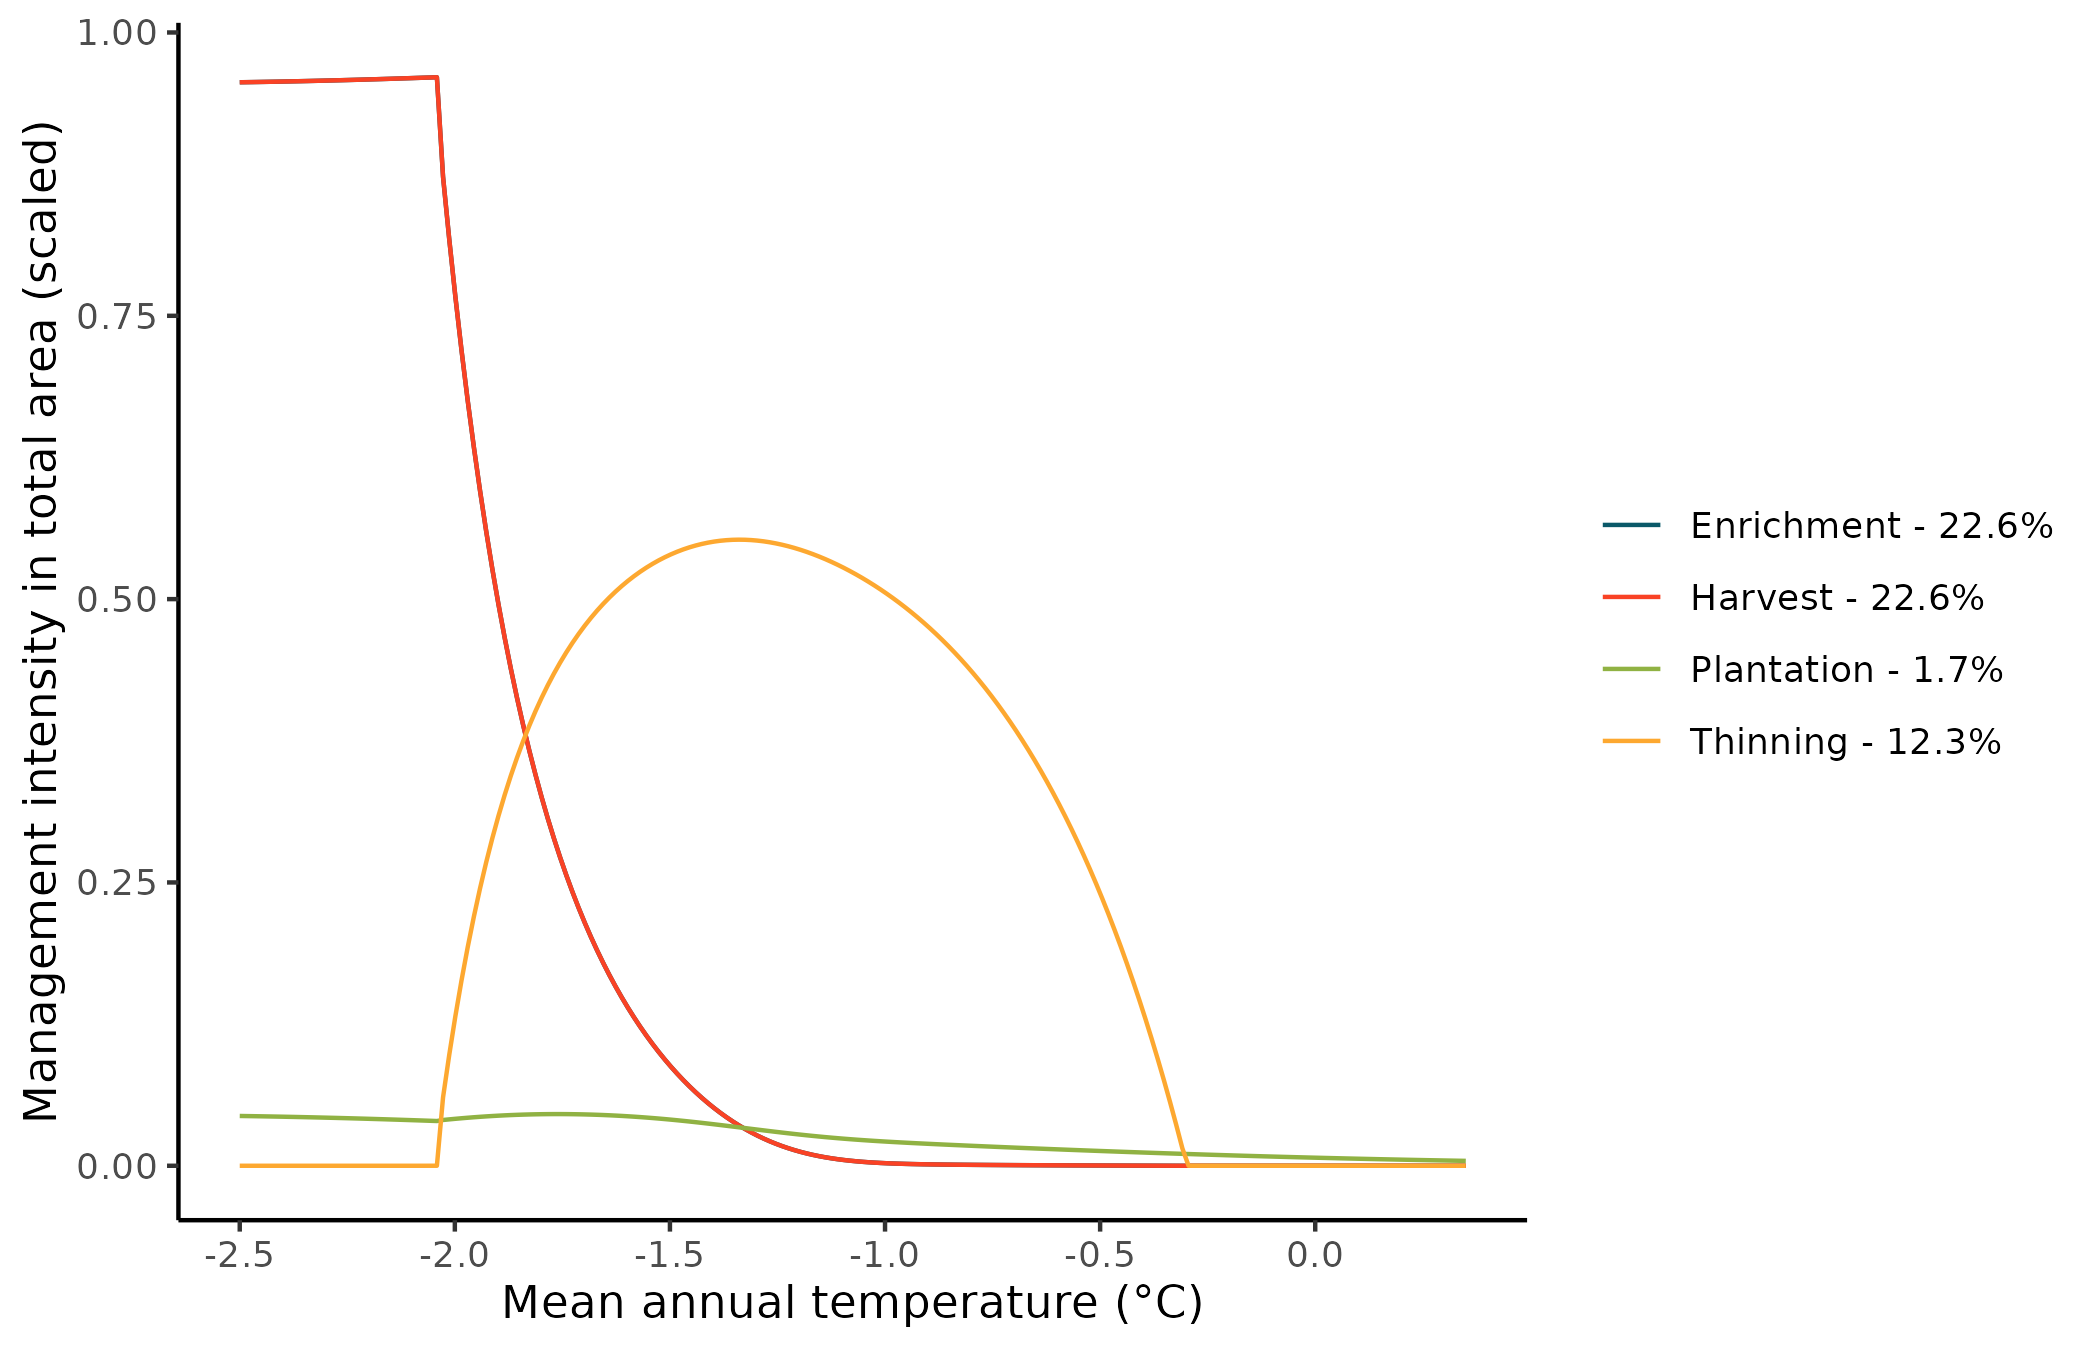 Figure 8: Distribution of management intensity adjusted by the amount of forest state available at the equilibrium to be managed. For example, at lower Mean Annual Temperature (MAT) ranges, values close to 1 indicate that nearly 100% of the region is susceptible to harvesting or enrichment planting (lines overlap). This implies that at a management intensity of 50%, approximately half of the landscape in that region will be affected. The total sum of available states for management across the MAT axis is shown in the legend.